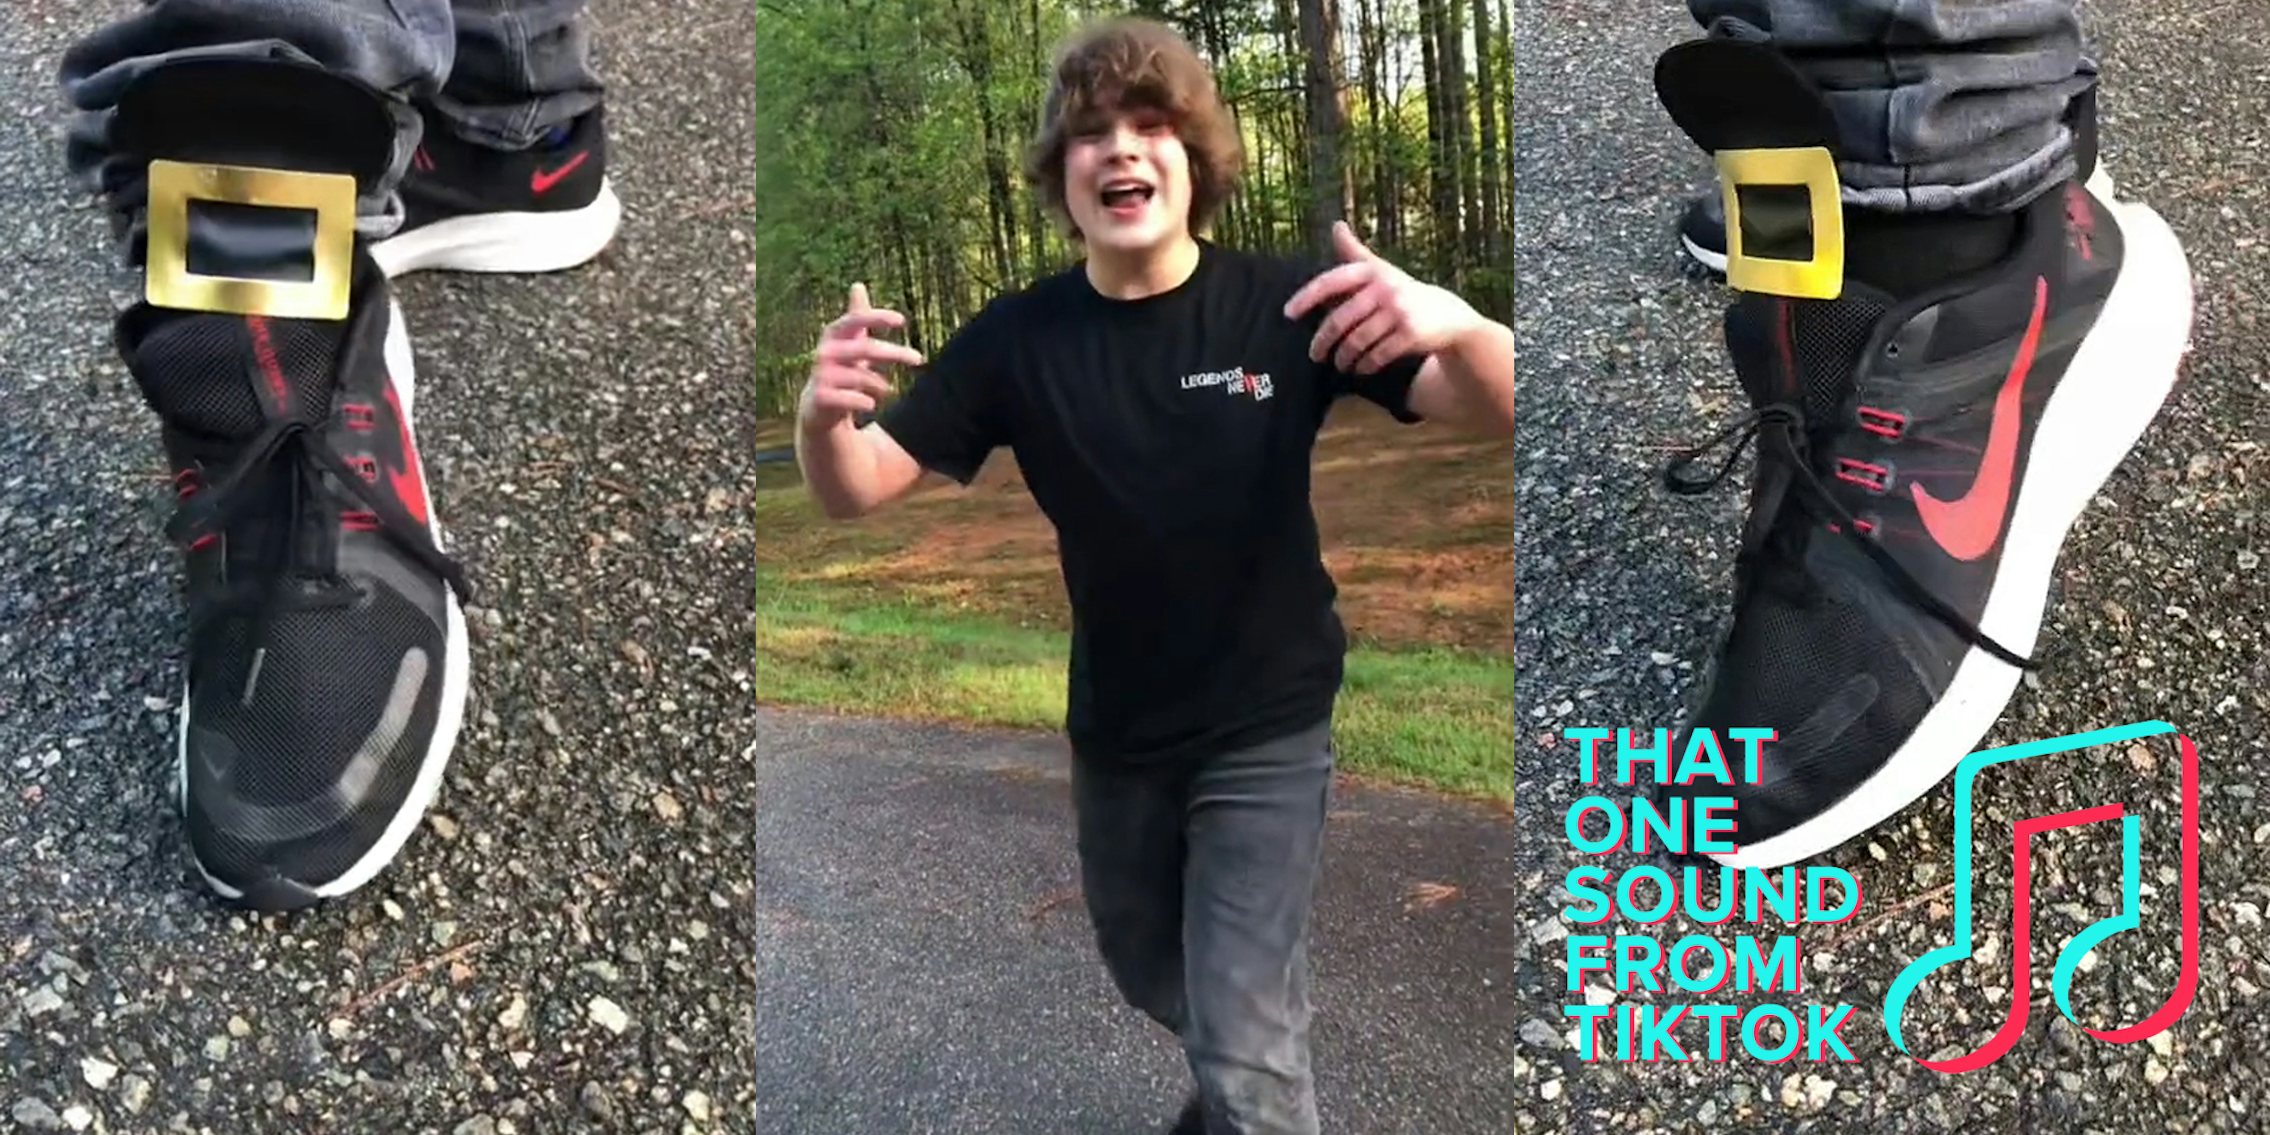 @edmondx showing off shoe with buckle (l) @edmondx speaking outside (c) @edmondx showing off shoe with buckle as part of the one two buckle my shoe meme, with THAT ONE SOUND FROM TIKTOK logo in bottom right corner (r).